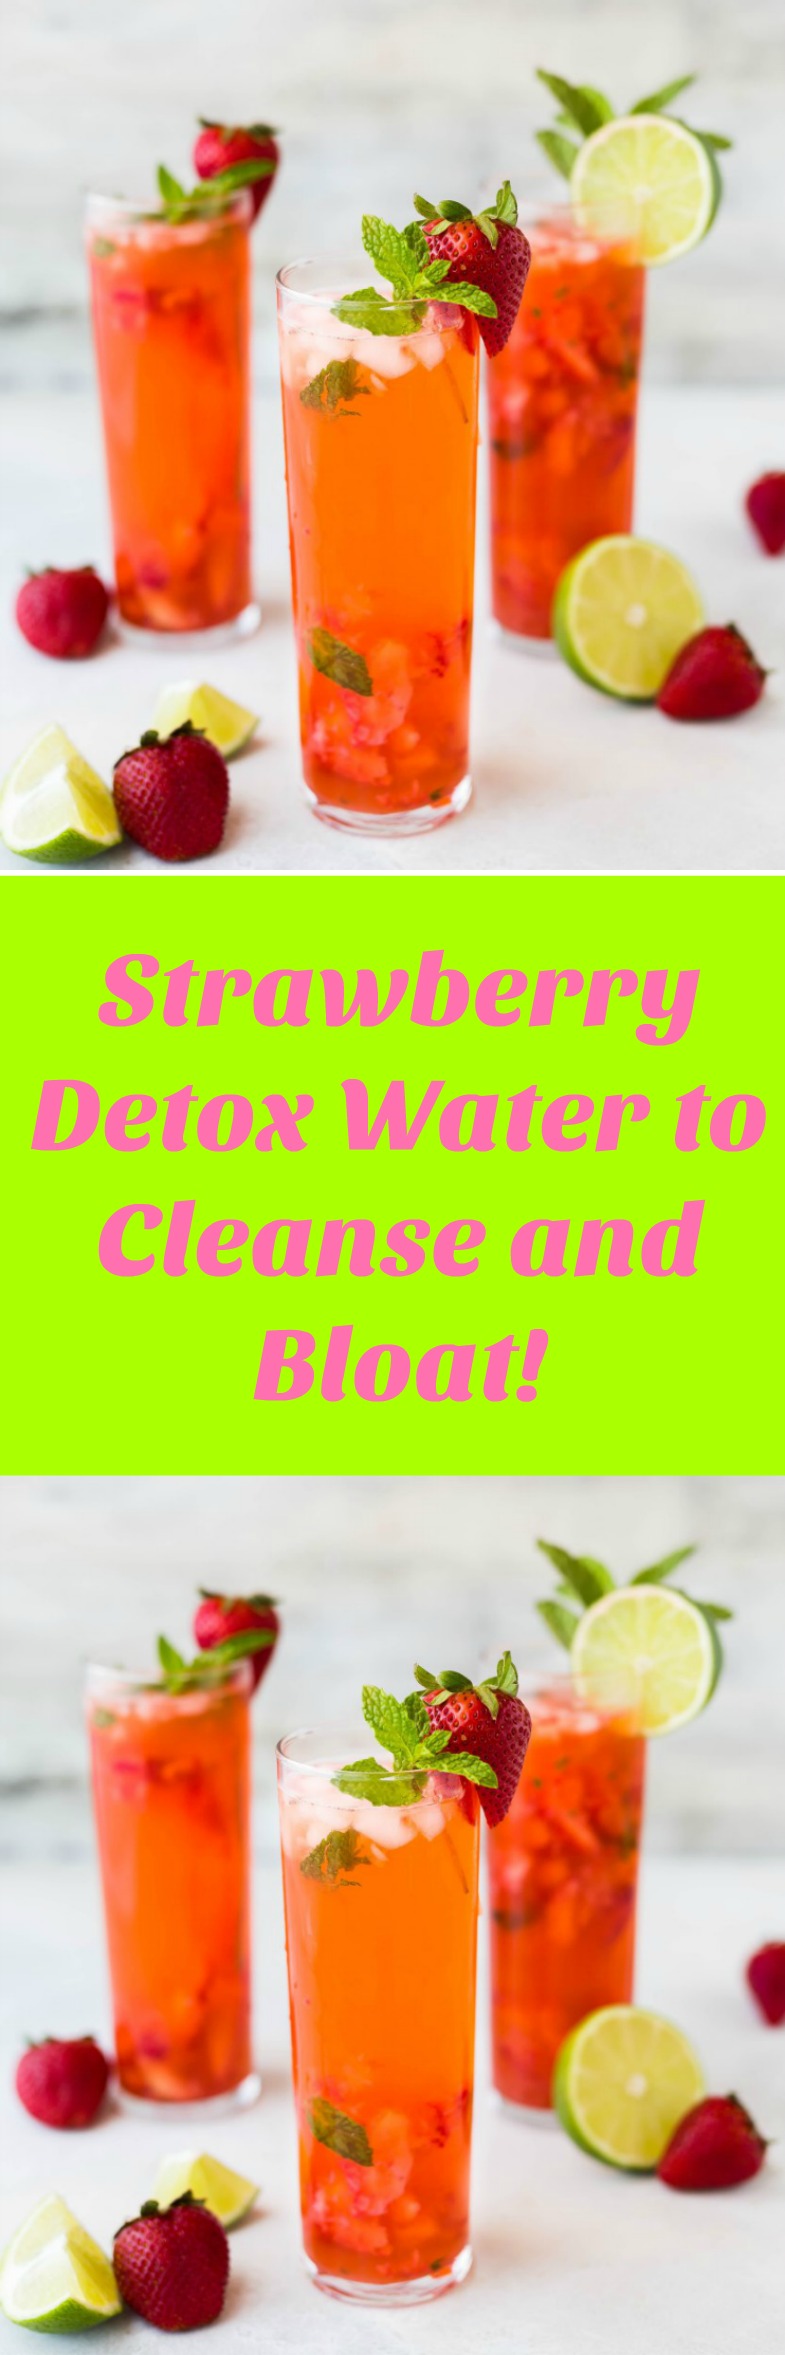 You're going to love the flavor of this <strong>Detox Water to Cleanse and Debloat</strong> that belly that has maybe gotten out of control! Drink at least 3 glasses first thing in the morning